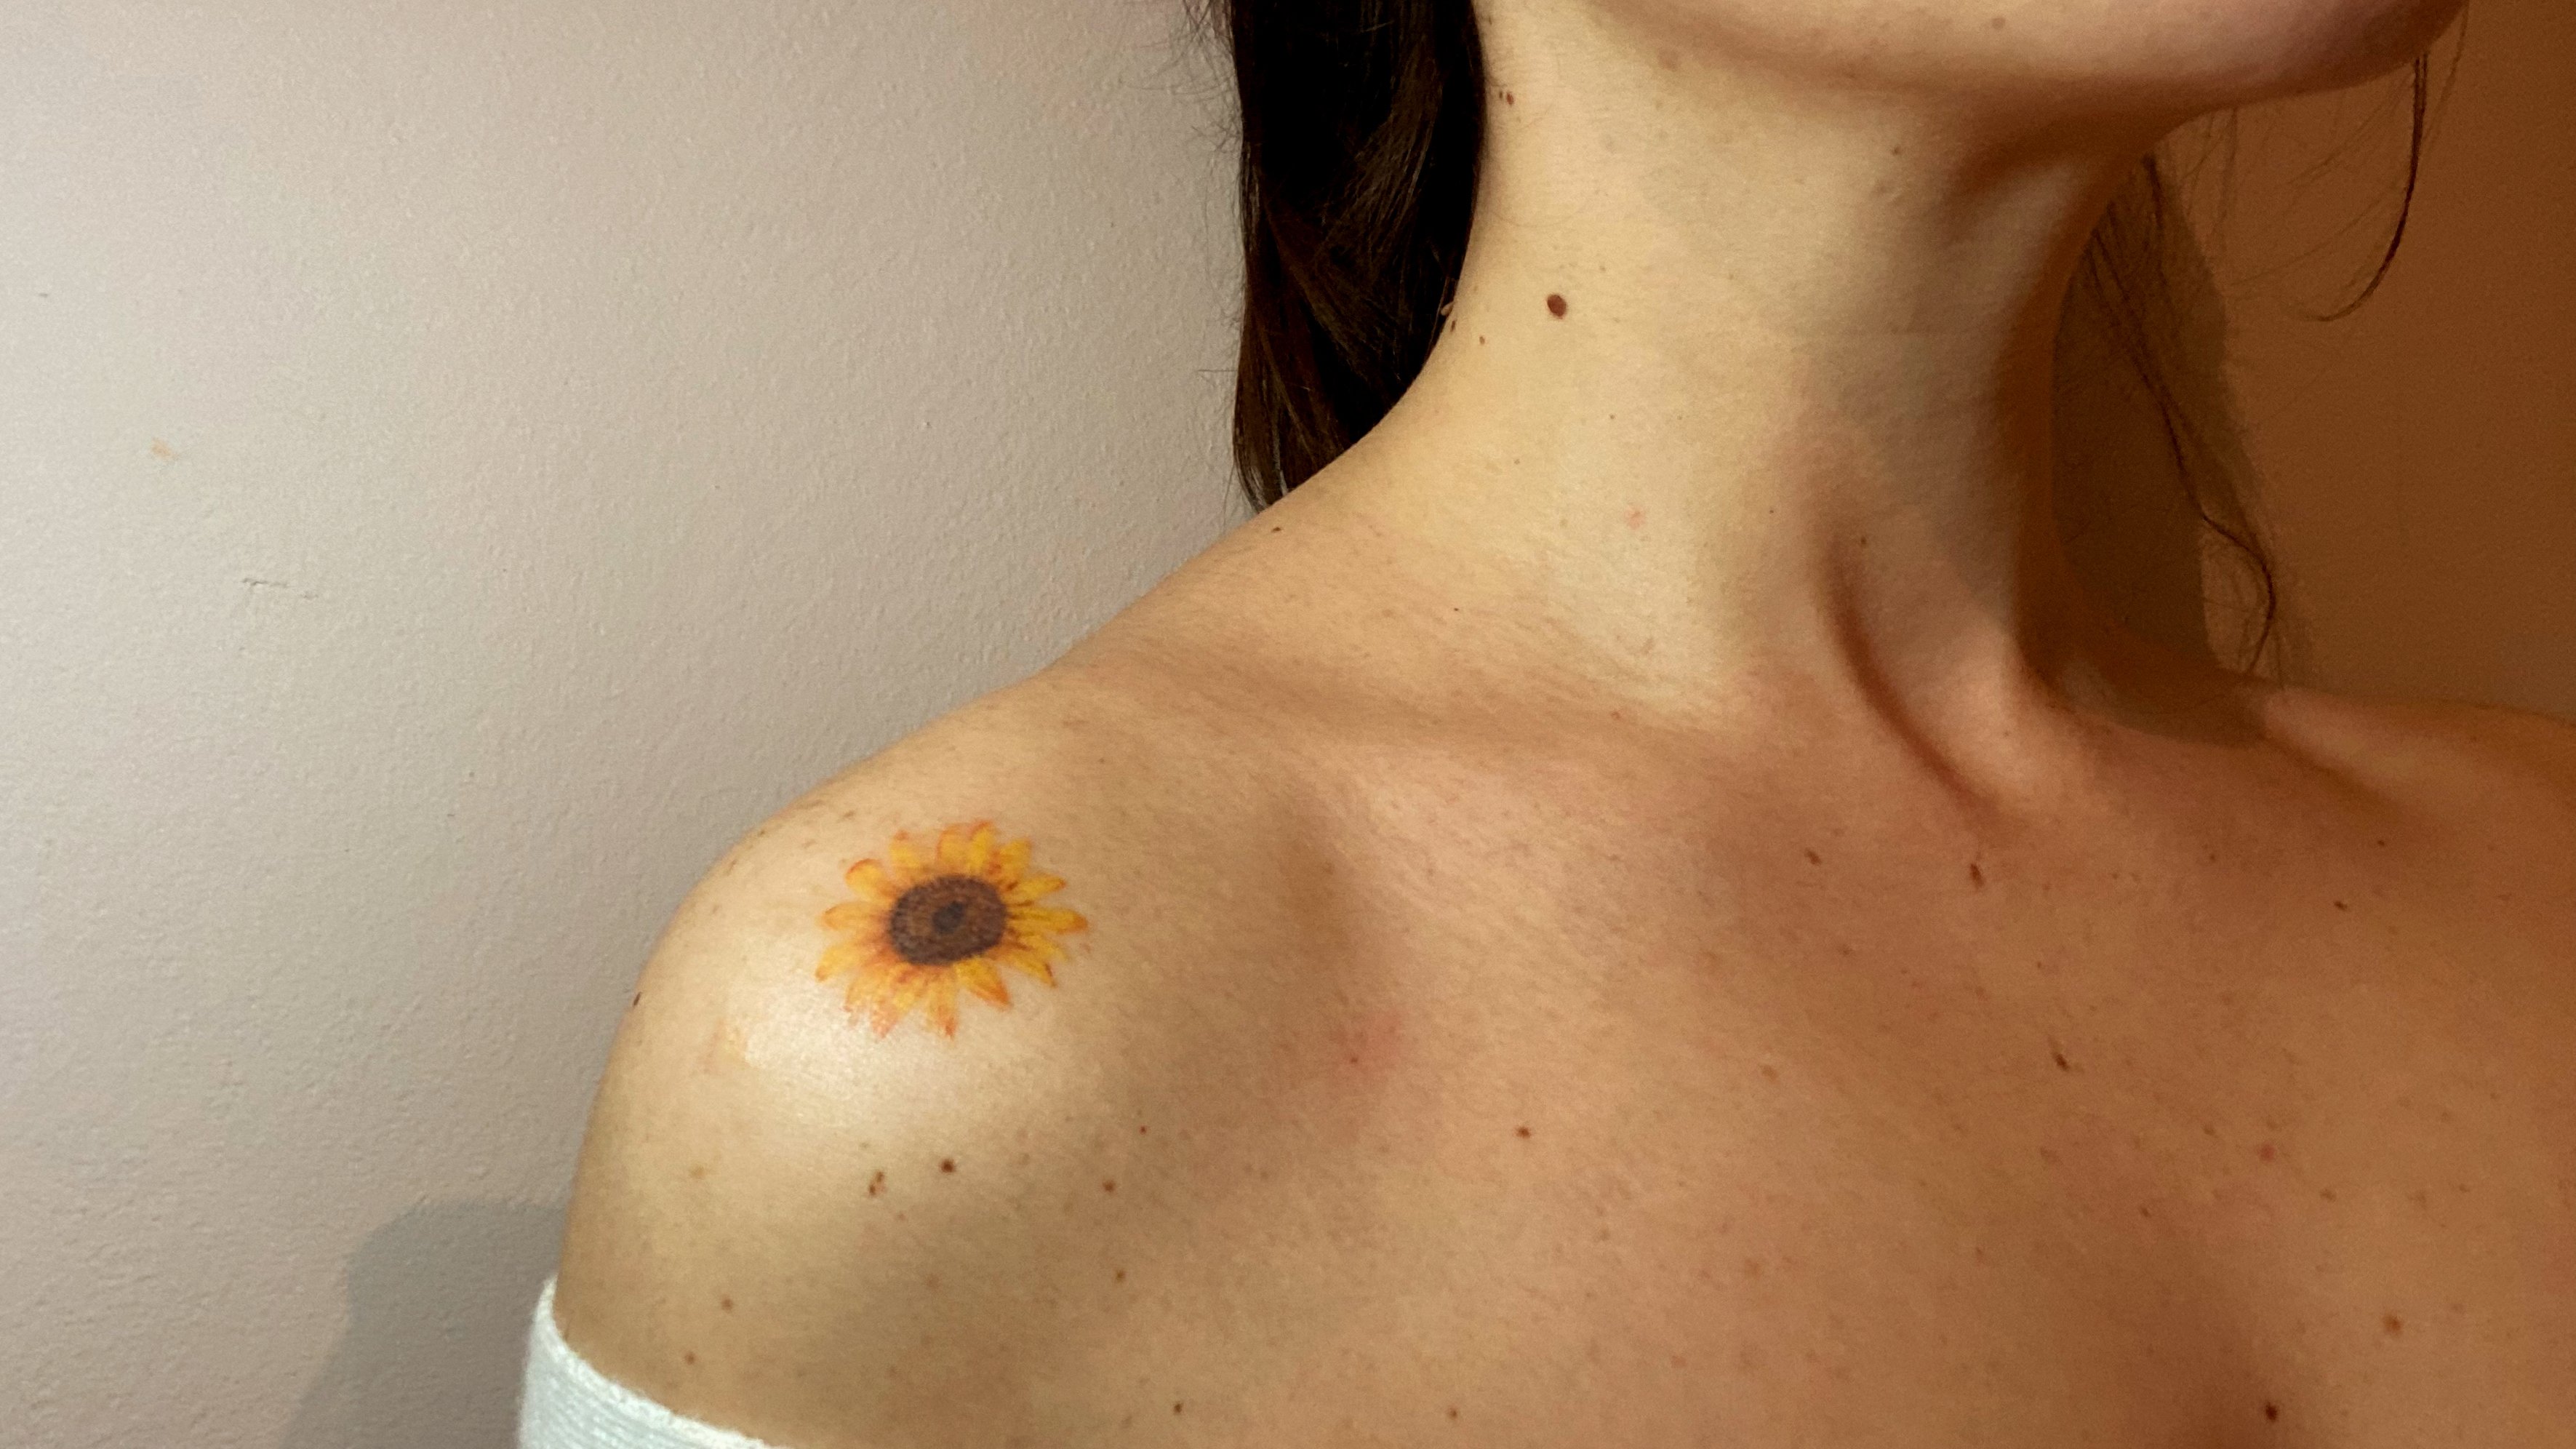 Woman with a flower tattoo on her shoulder. | Source: Getty Images